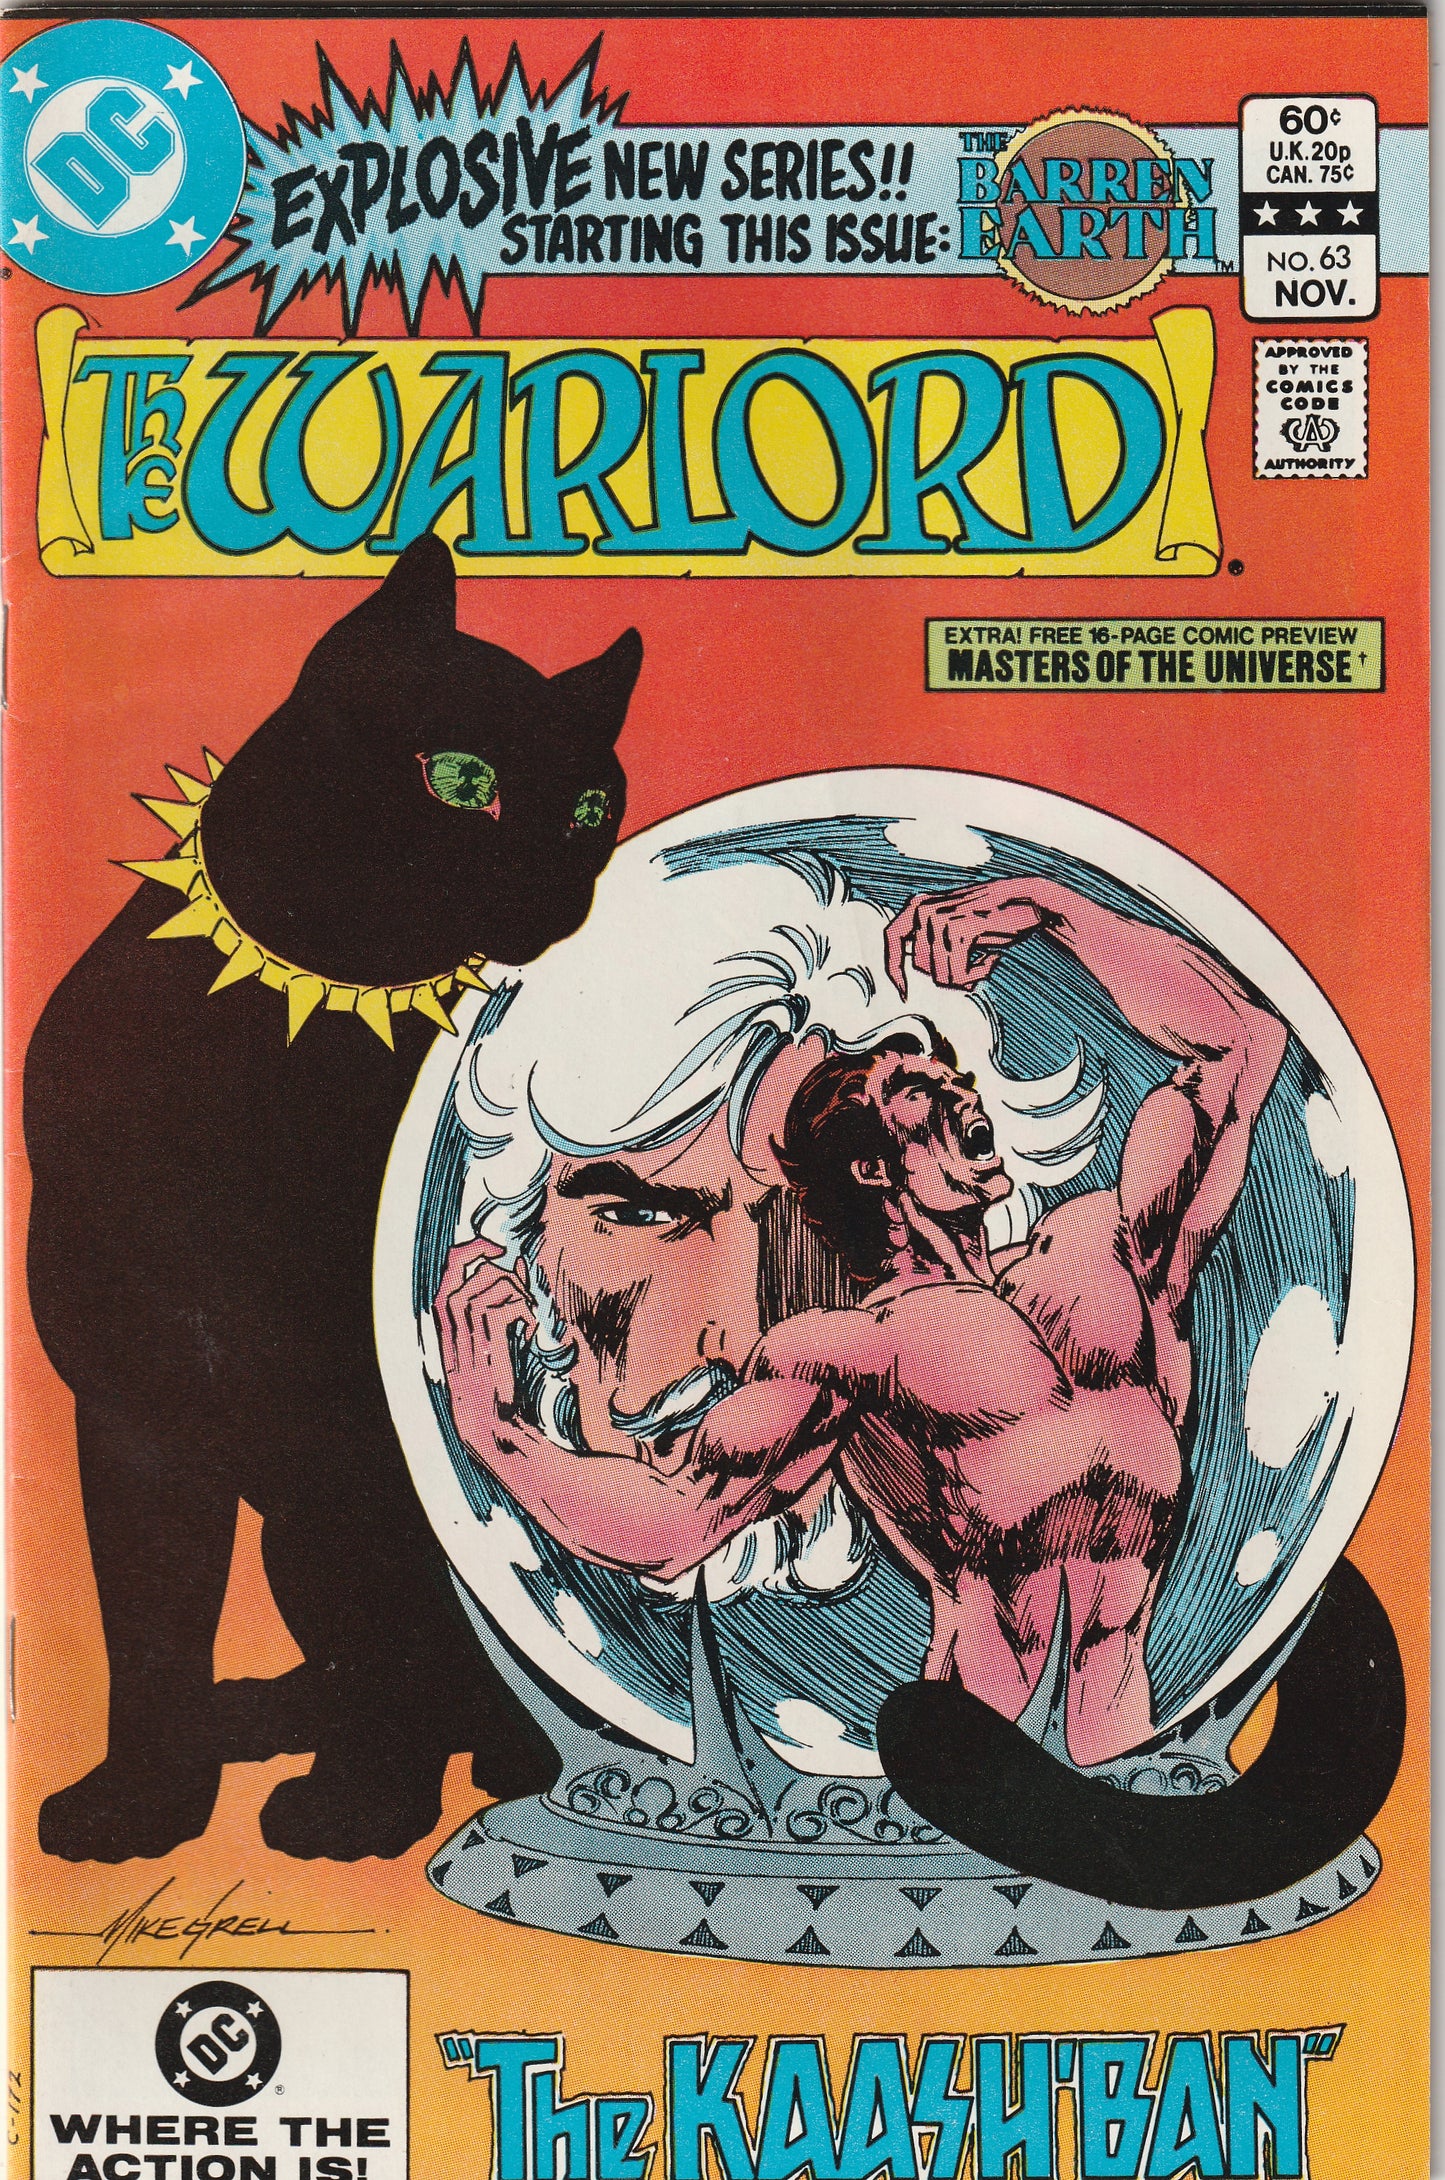 Warlord #63 (1982) - 1st Dan Jurgens work; Master of the Universe Preview Included